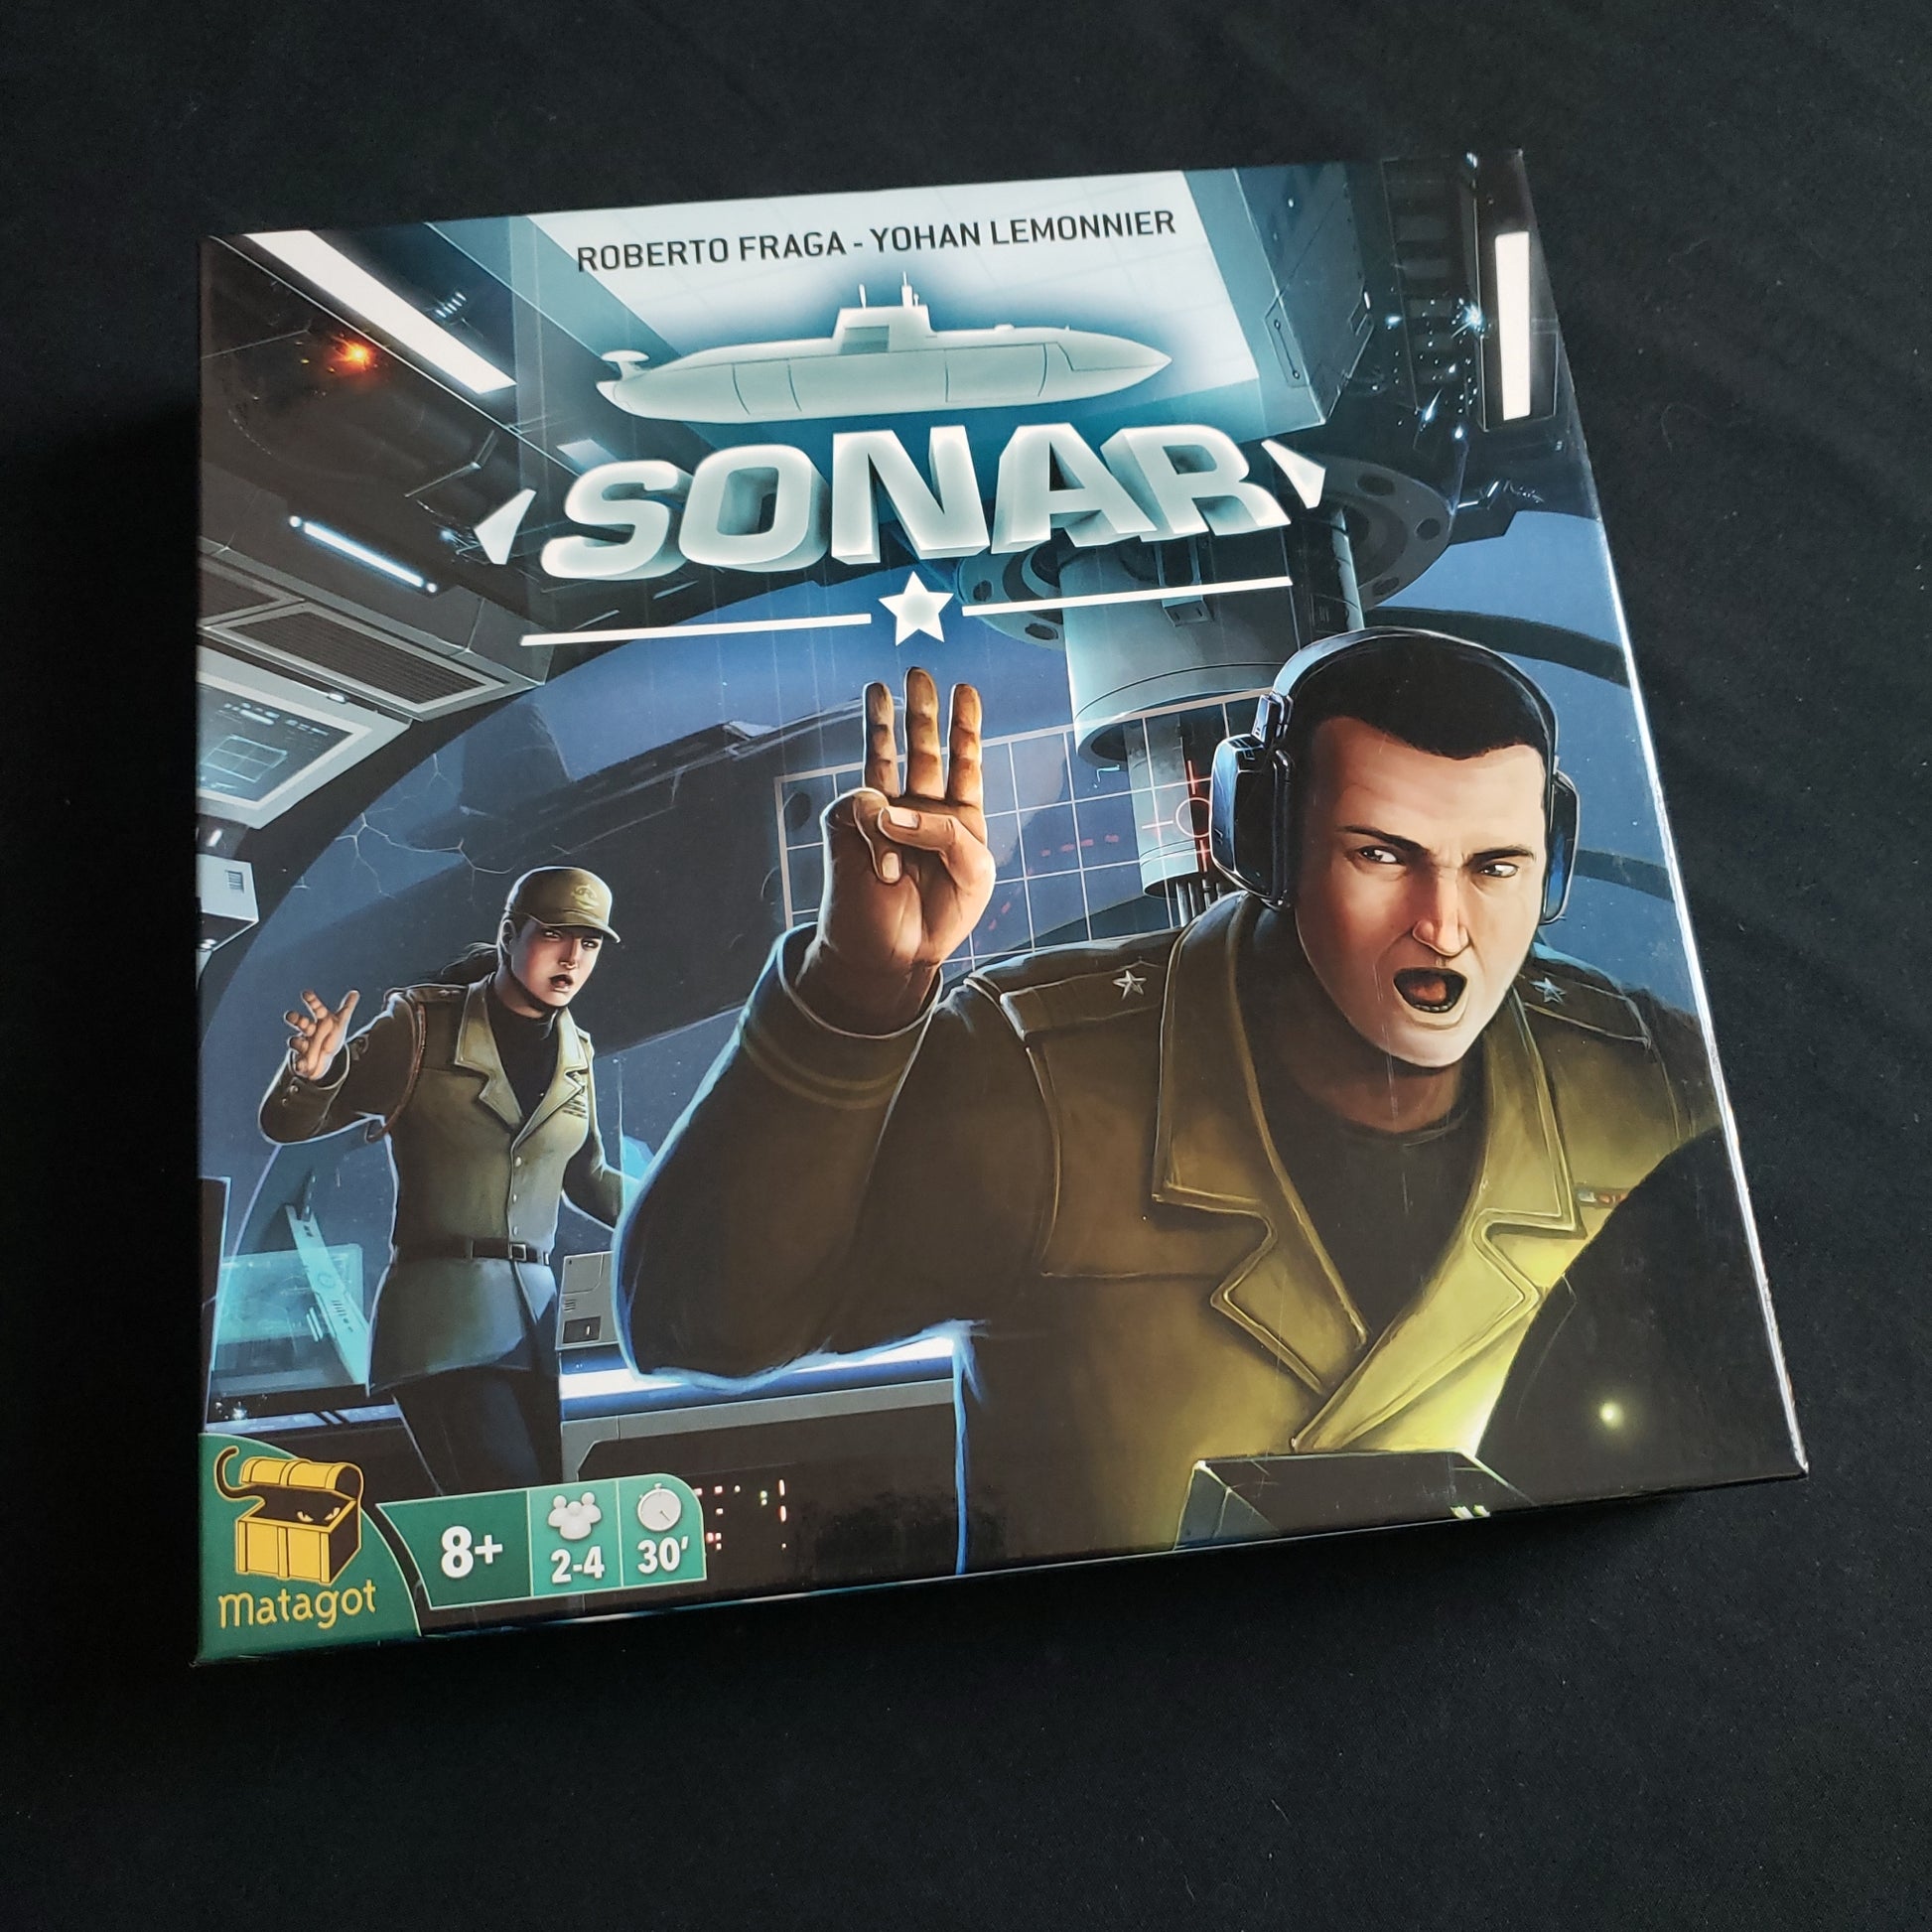 Image shows the front cover of the box of the Sonar board game